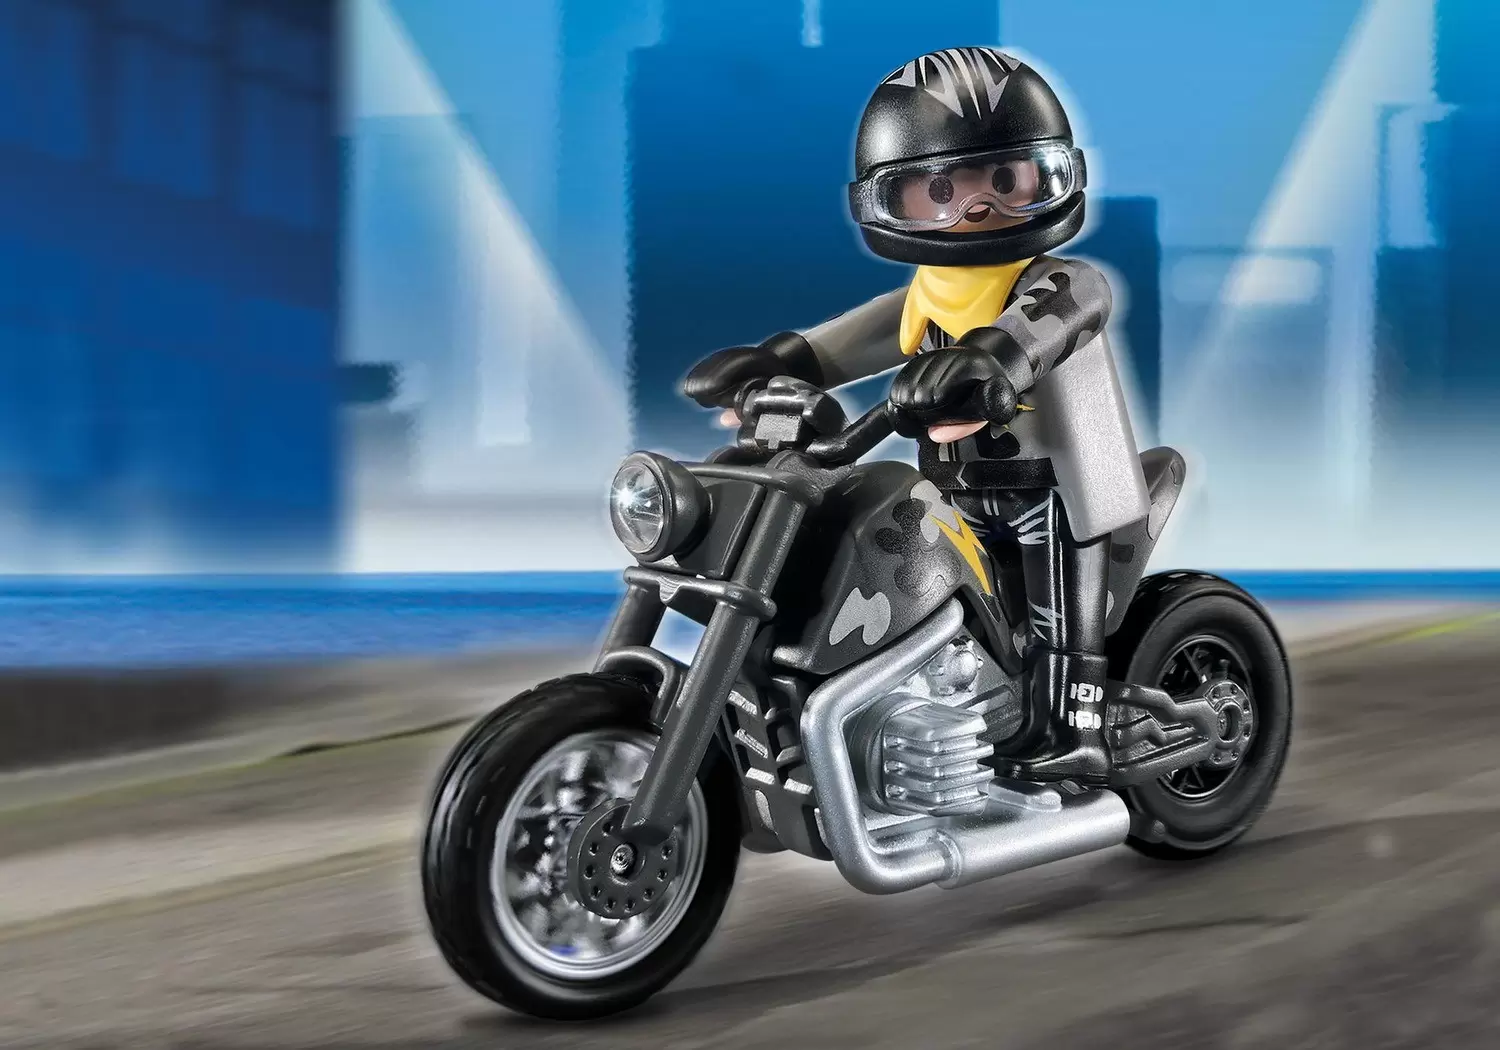 Playmobil Motor Sports - Custom Motorcycle with Rider